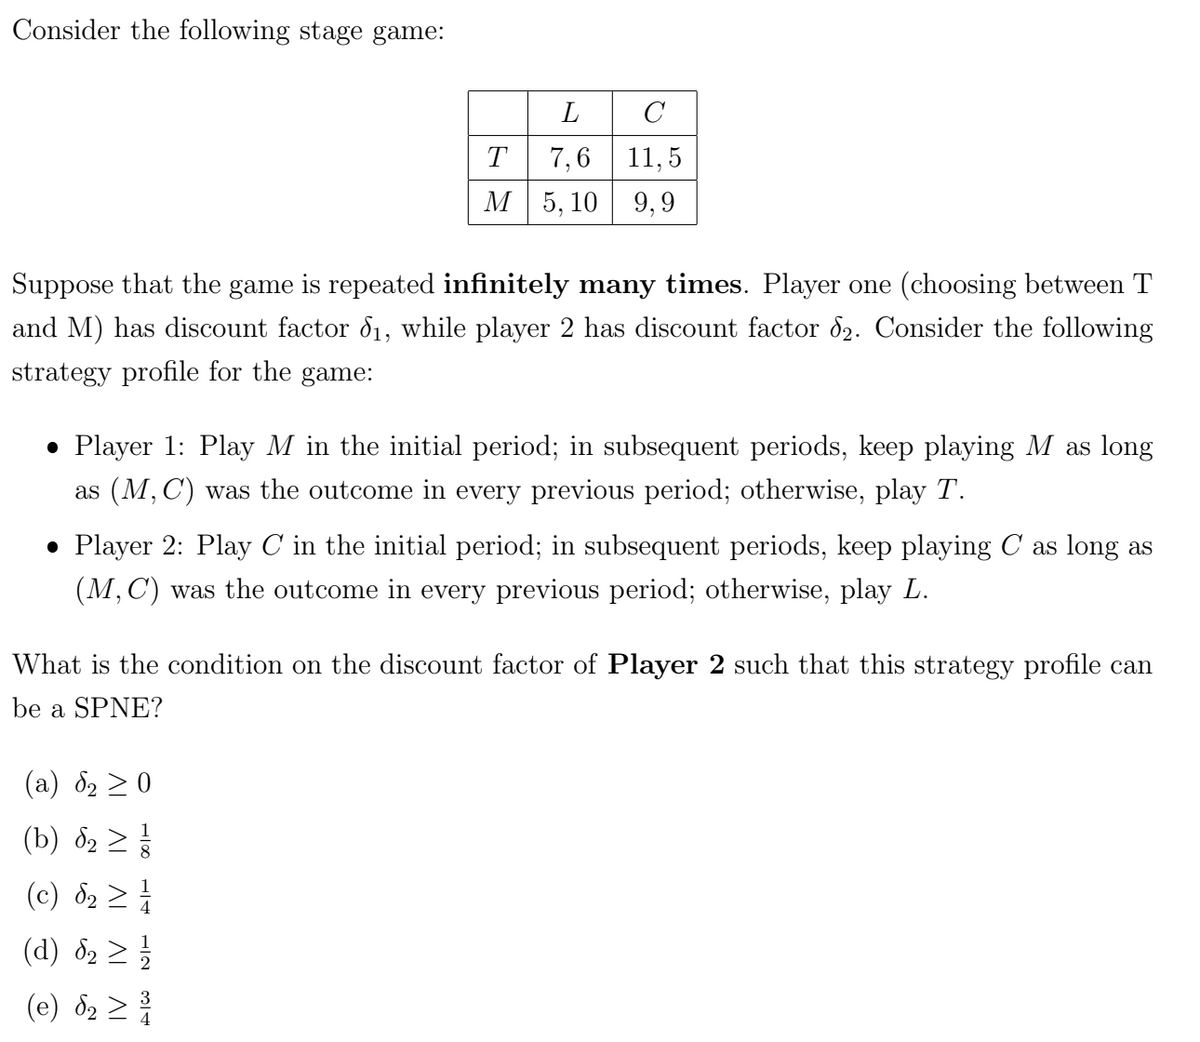 Consider the following stage game:
L
C
T
7,6 11,5
M 5,10 9,9
Suppose that the game is repeated infinitely many times. Player one (choosing between T
and M) has discount factor 1, while player 2 has discount factor 82. Consider the following
strategy profile for the game:
• Player 1: Play M in the initial period; in subsequent periods, keep playing M as long
as (M,C) was the outcome in every previous period; otherwise, play T.
• Player 2: Play C in the initial period; in subsequent periods, keep playing C as long as
(M, C) was the outcome in every previous period; otherwise, play L.
What is the condition on the discount factor of Player 2 such that this strategy profile can
be a SPNE?
(a) 2 ≥0
(b) 82₂ ≥ 1/
(c) d₂ ≥
(d) §₂ ≥ 1/1
2
(e) d₂ ≥ 31
4